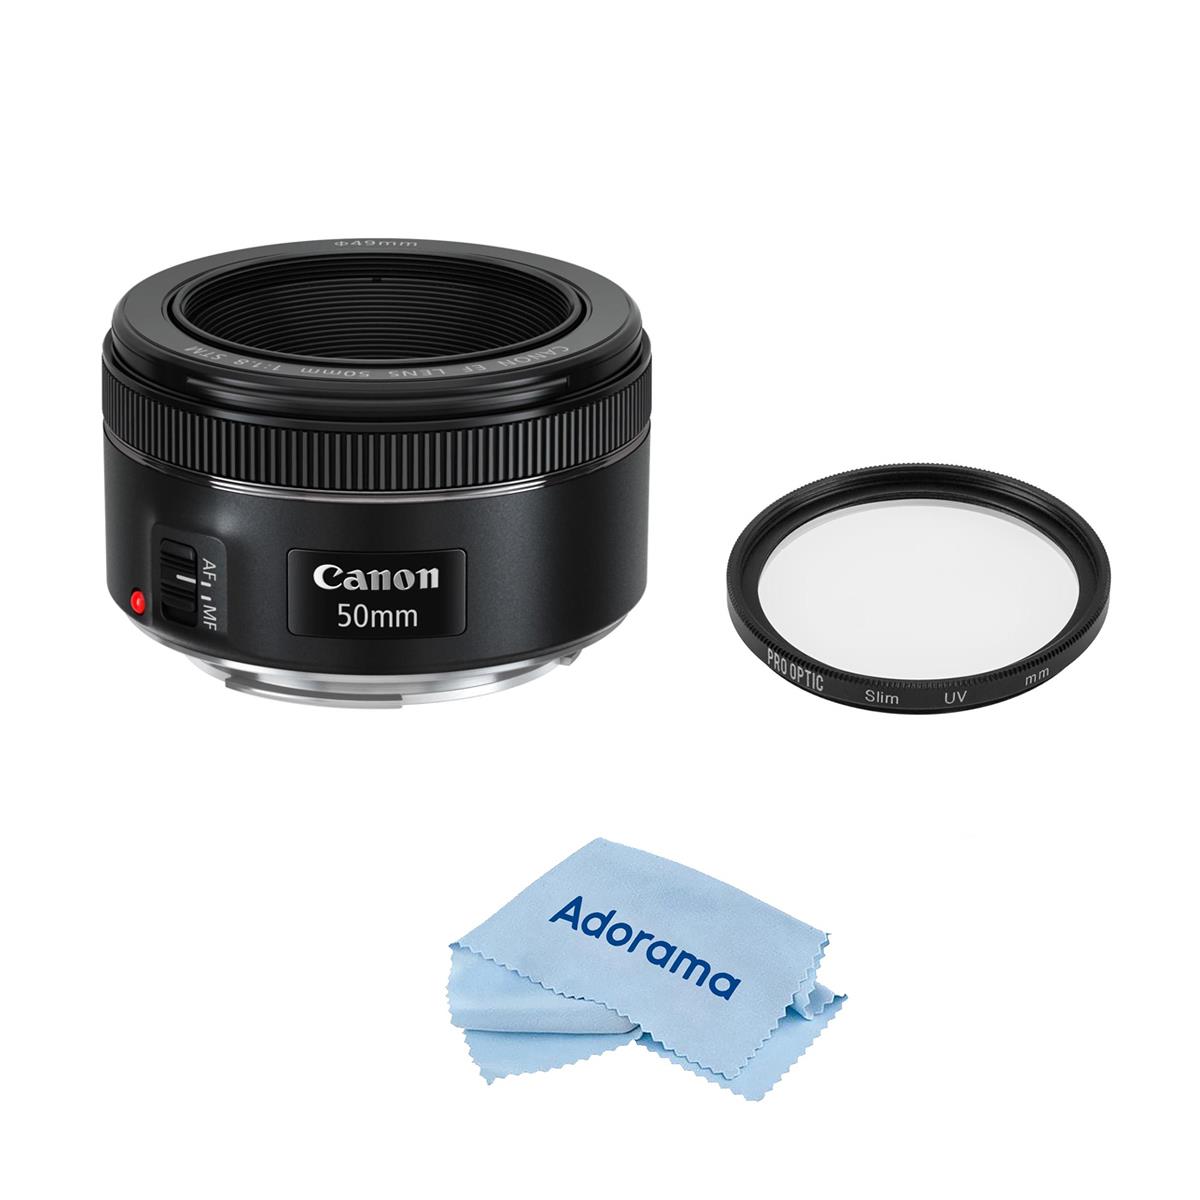 Image of Canon EF 50mm f/1.8 STM Lens with Accessories Kit